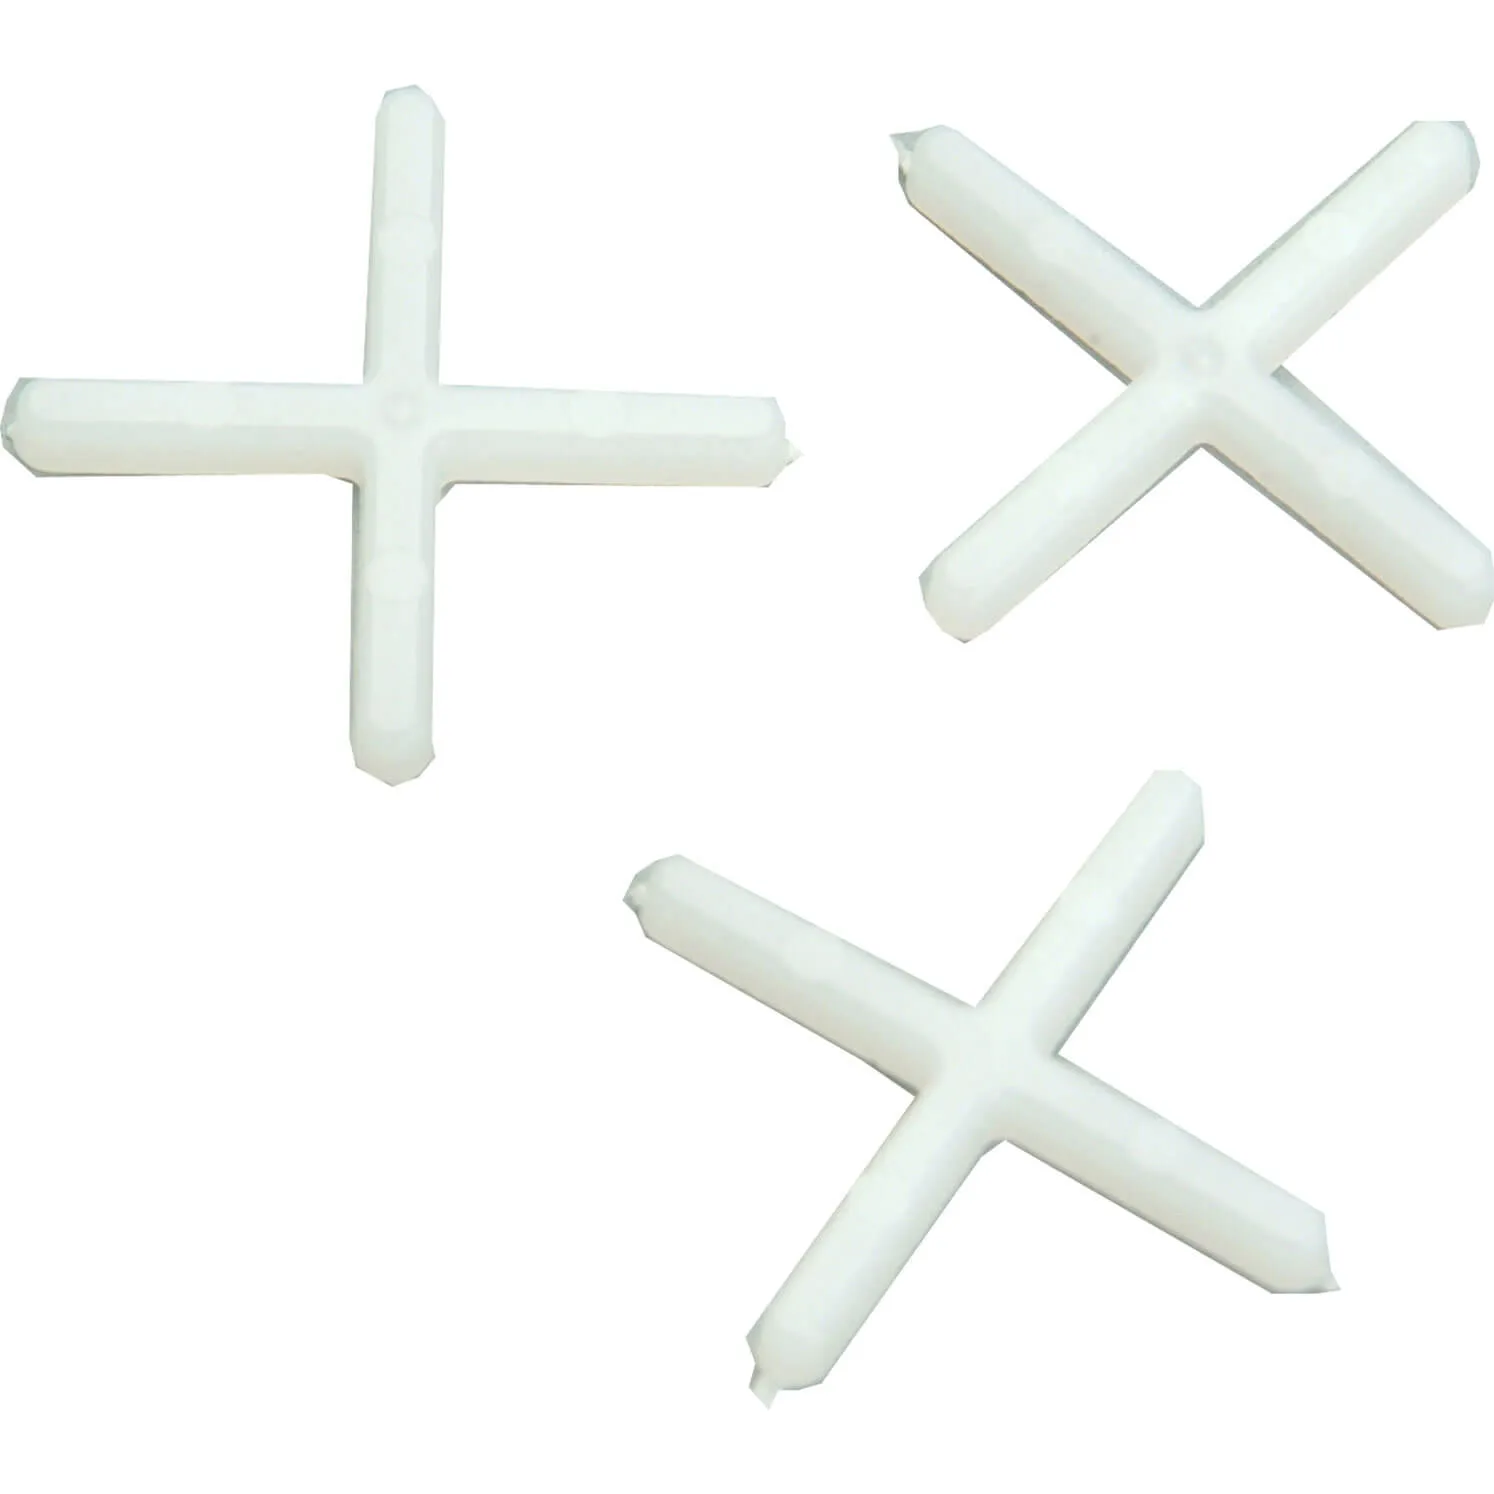 Vitrex Plastic Wall Tile Spacers - 1.5mm, Pack of 500